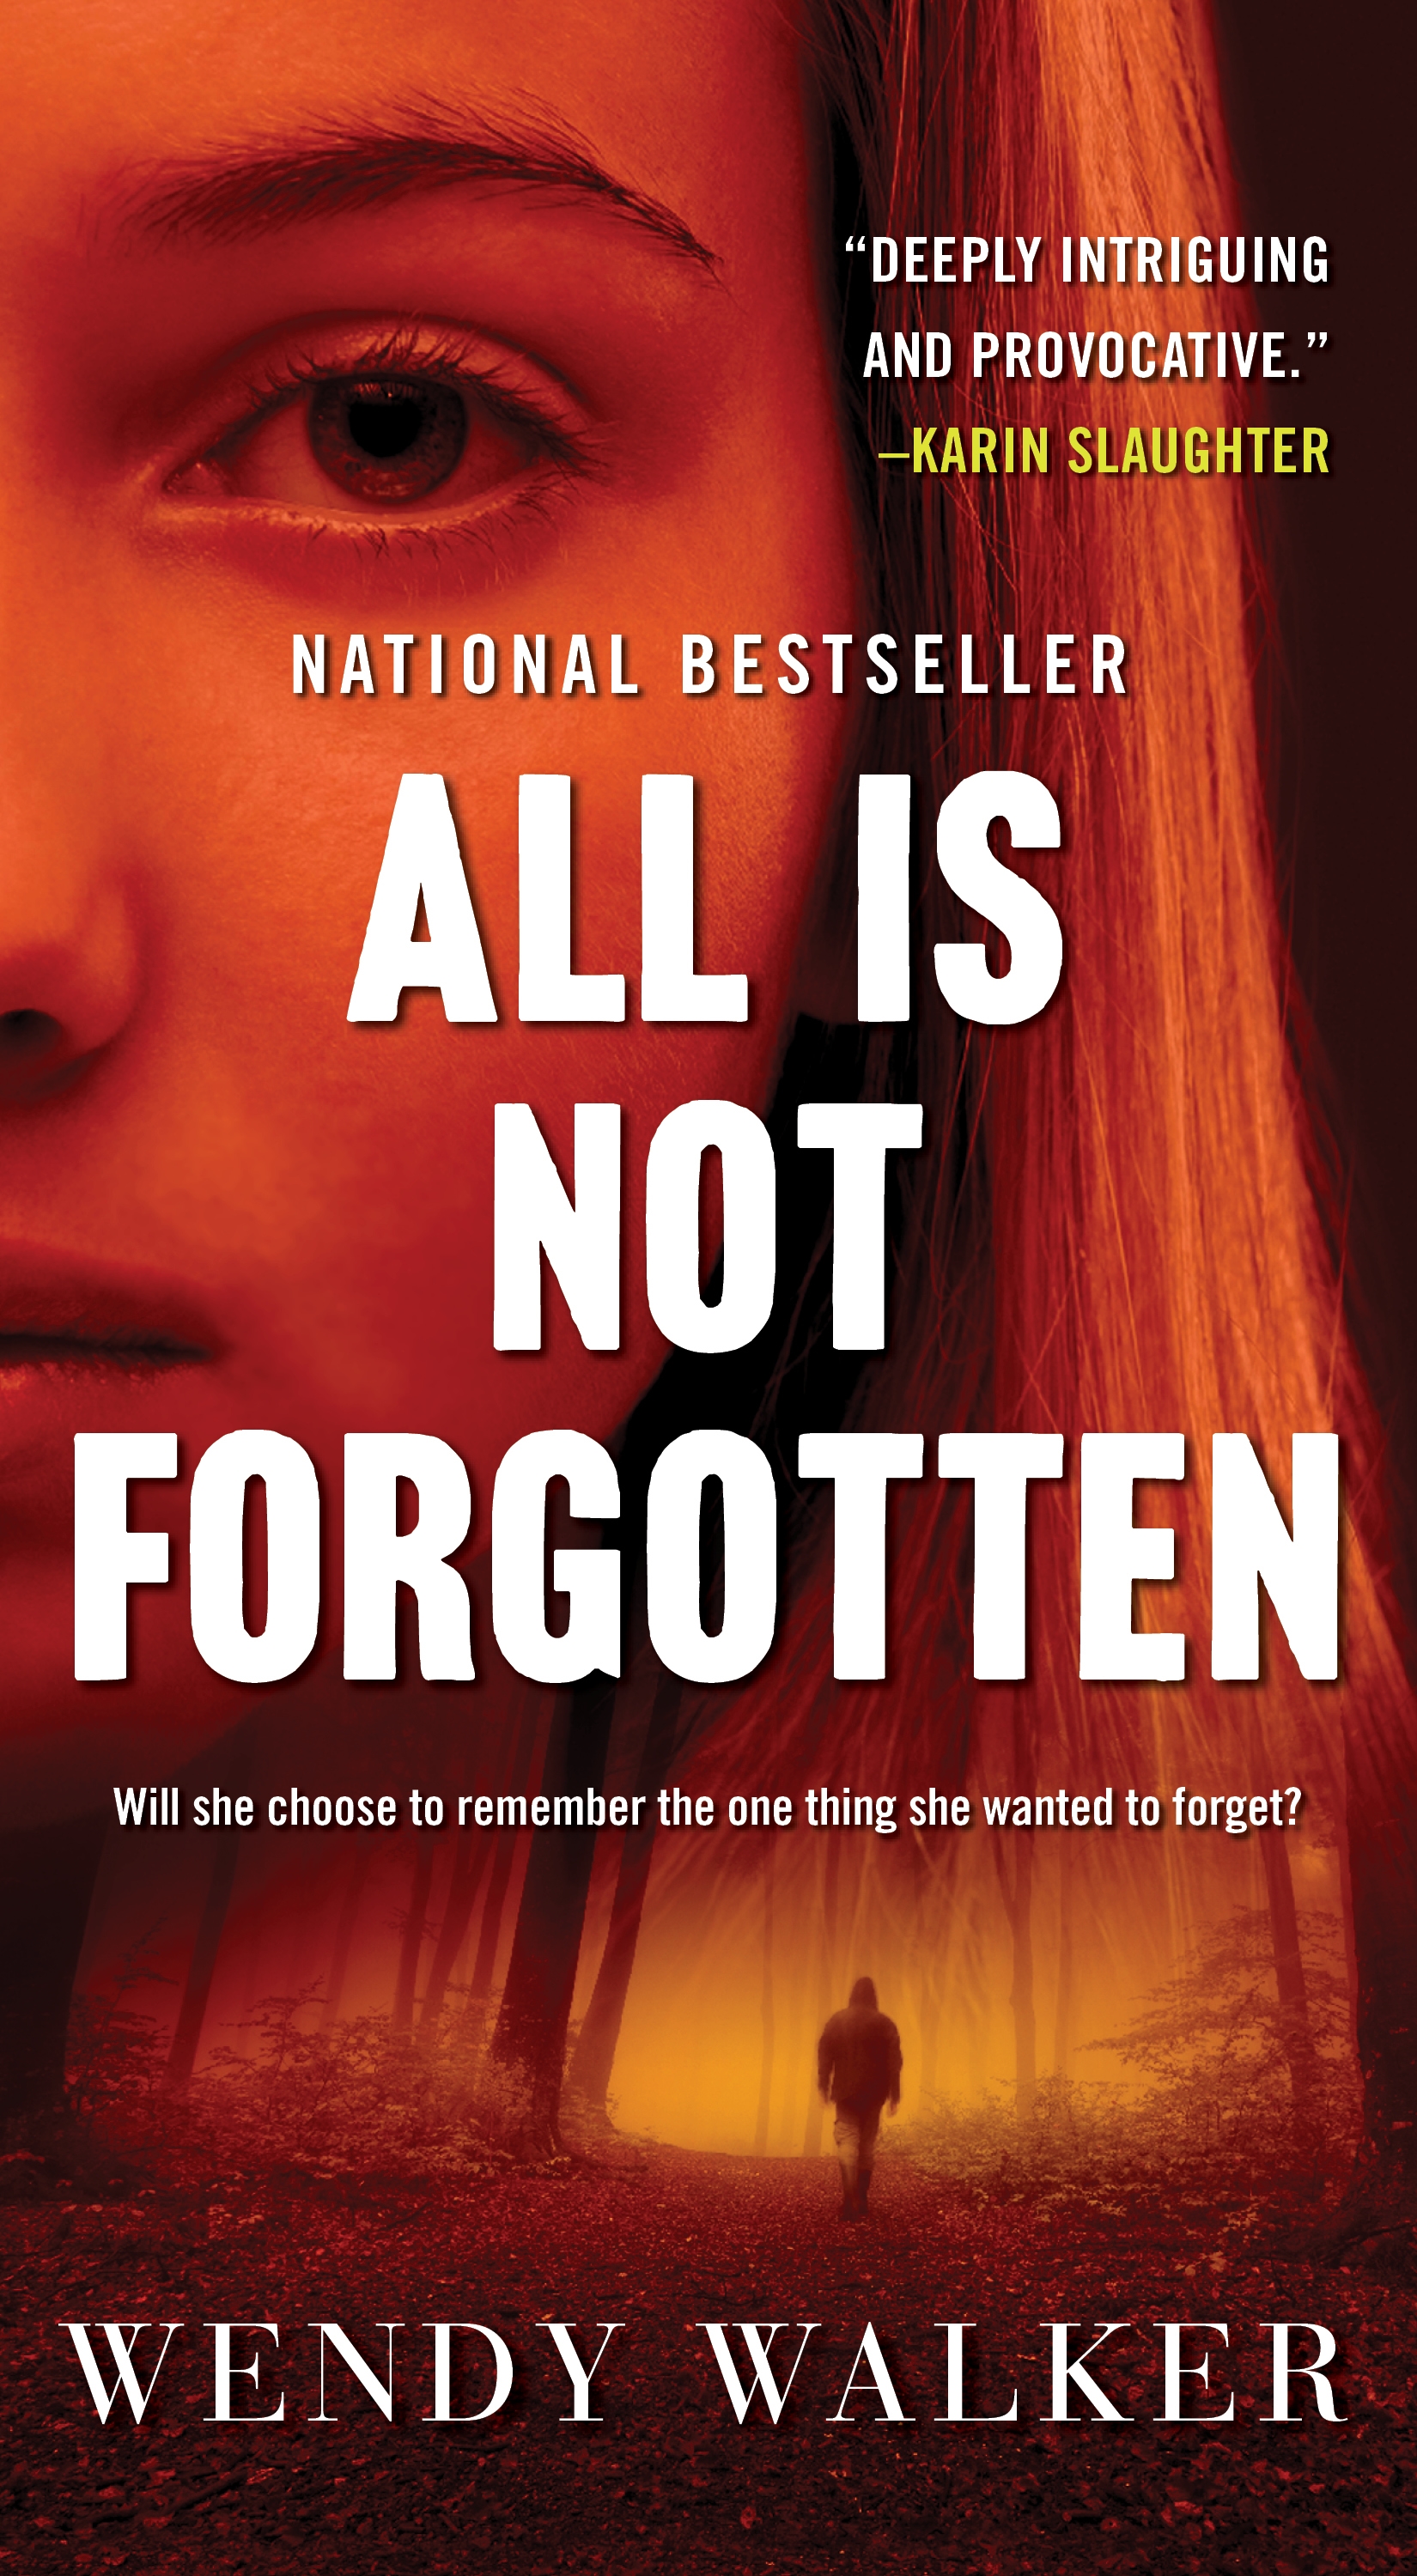 Book “All Is Not Forgotten” by Wendy Walker — January 29, 2019